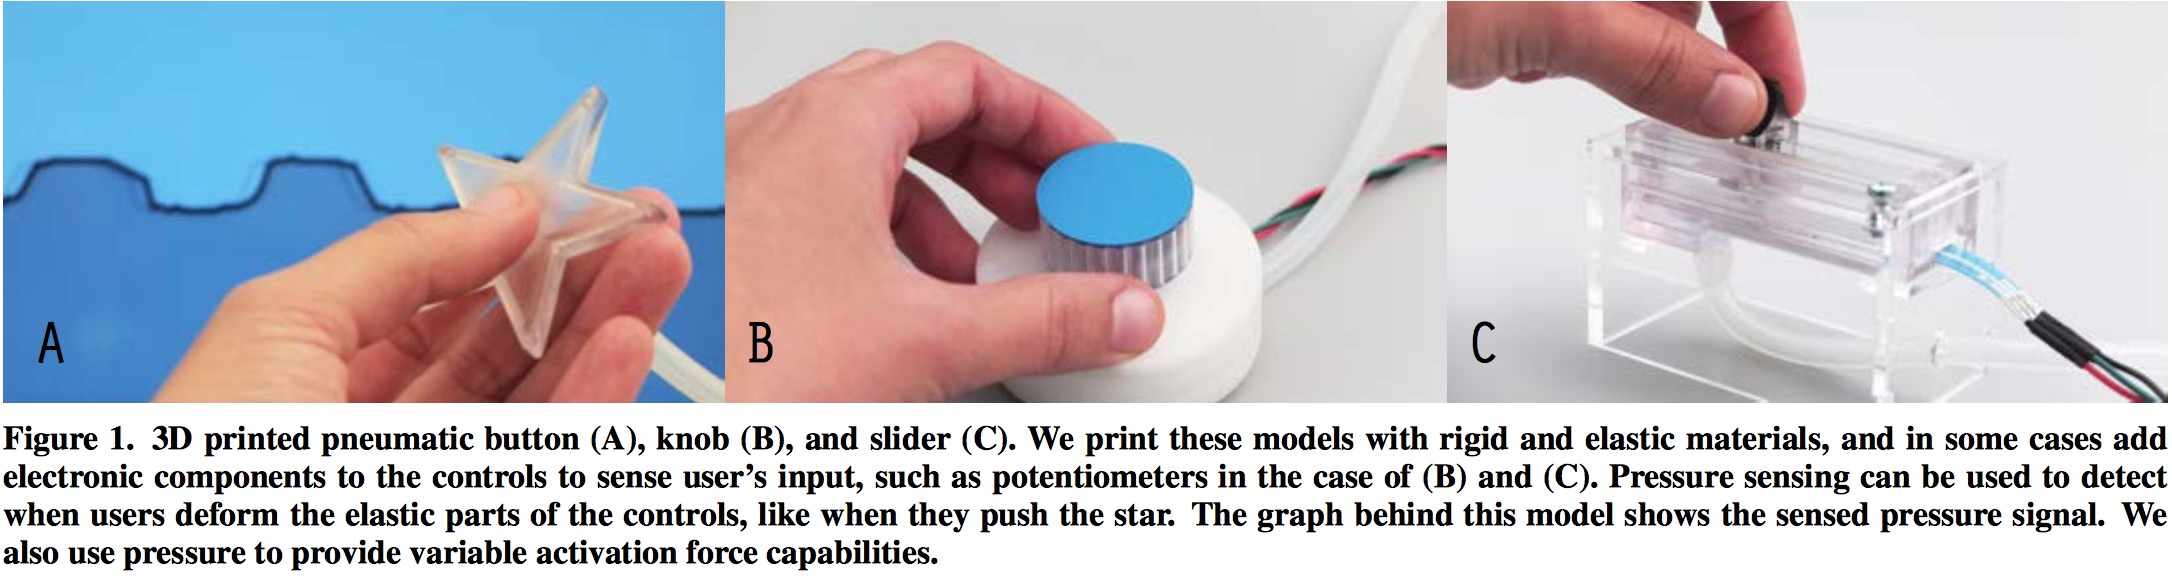 3D Printed Pneumatic Buttons Disney Research